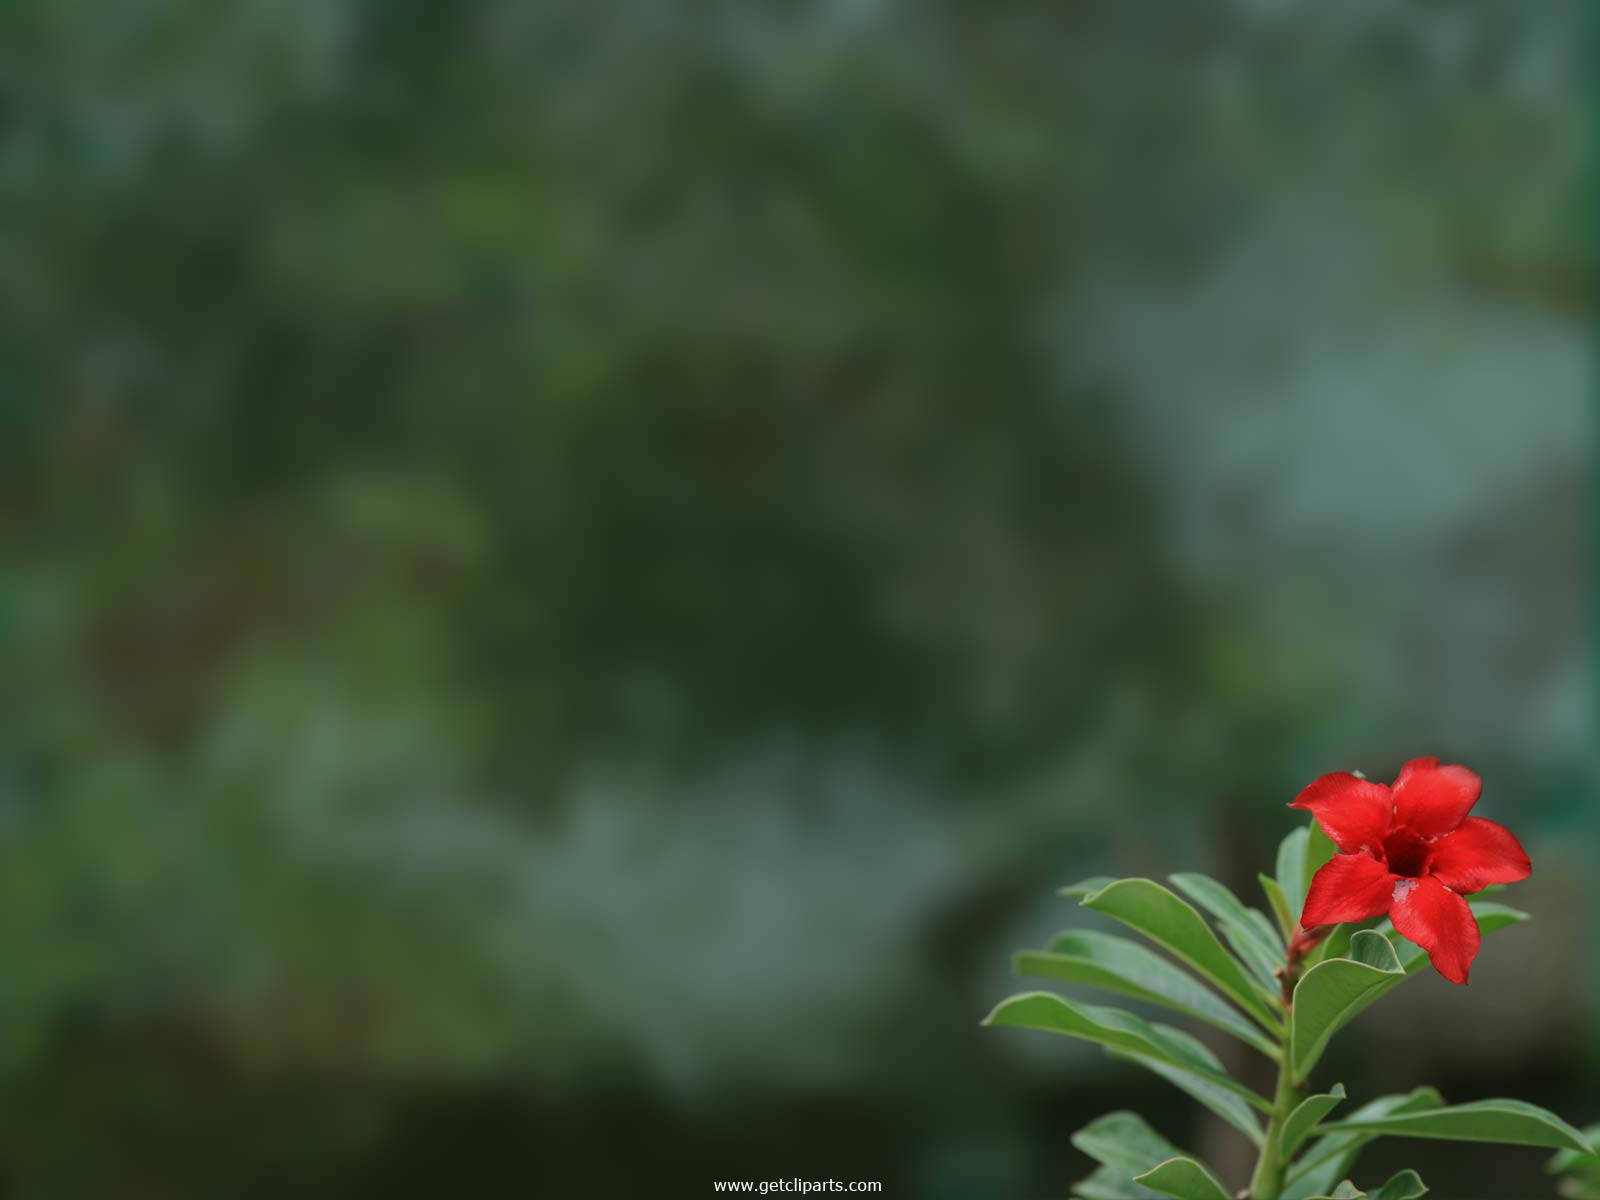 Wallpaper Background Here You Can See Amazing Red Flower